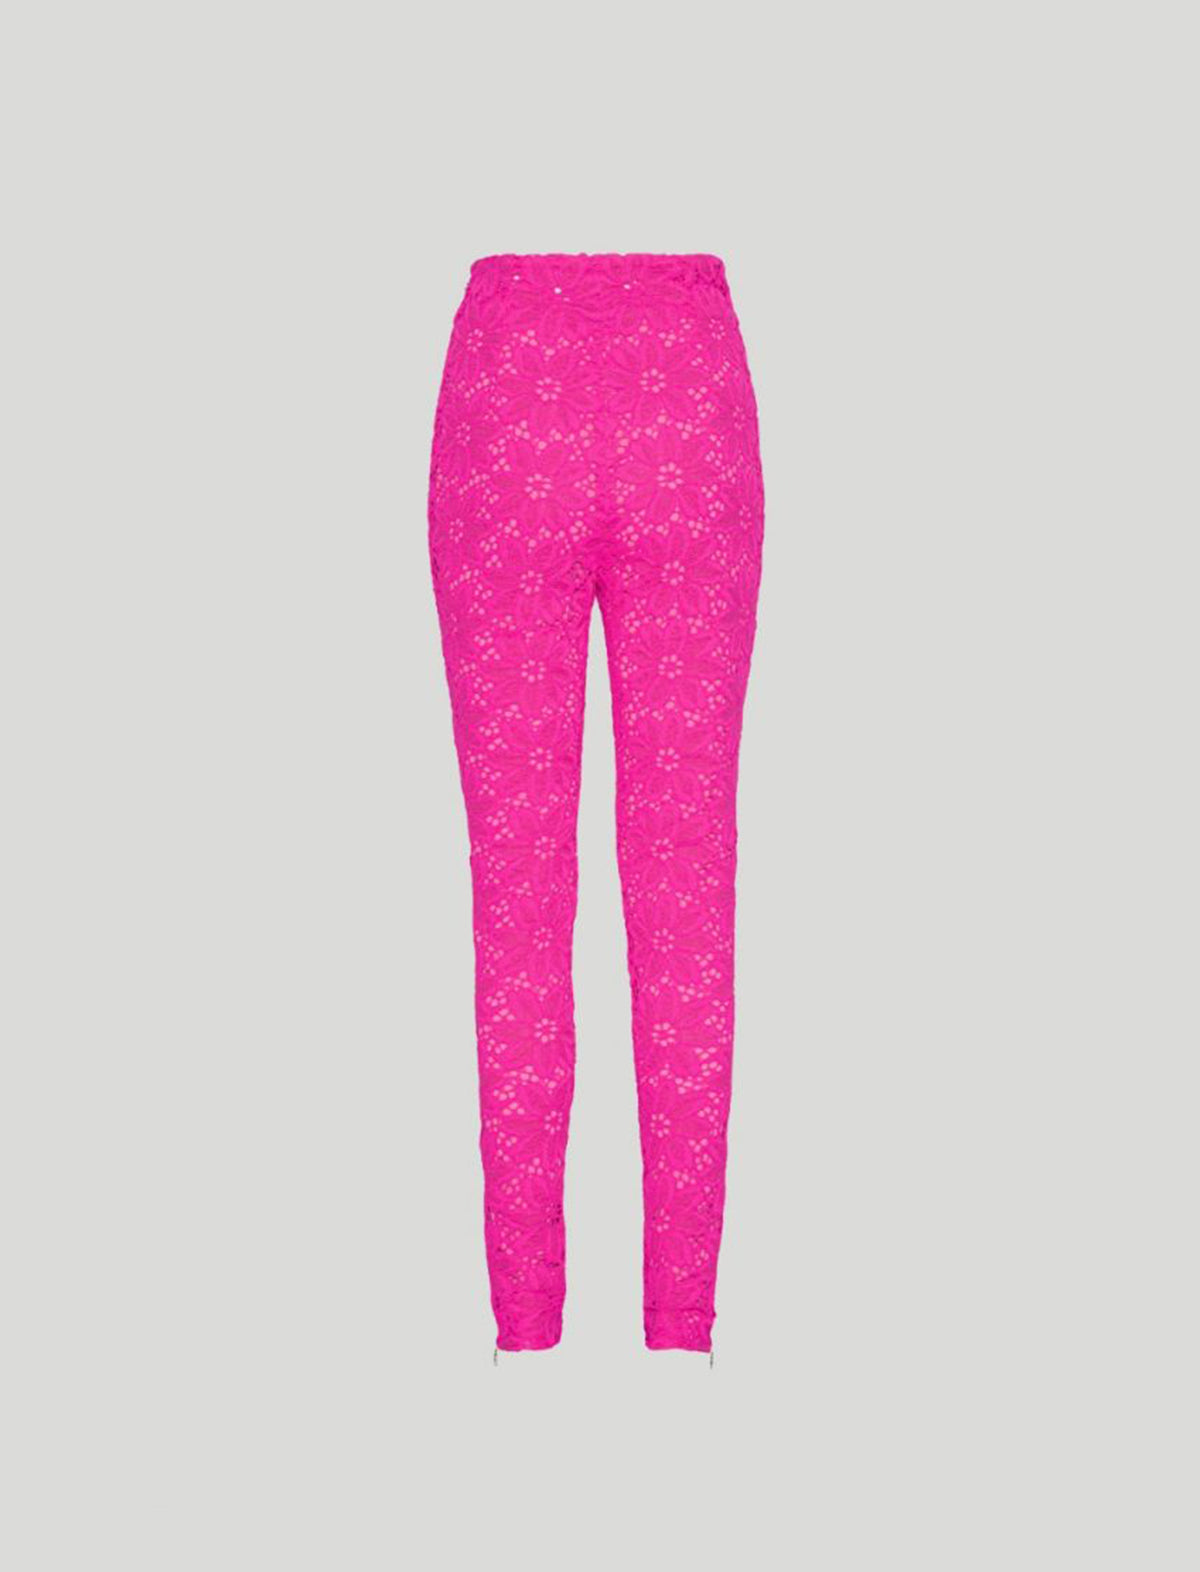 ROTATE Birger Christensen Heavy Lace High Rise Pants in Pink Glo